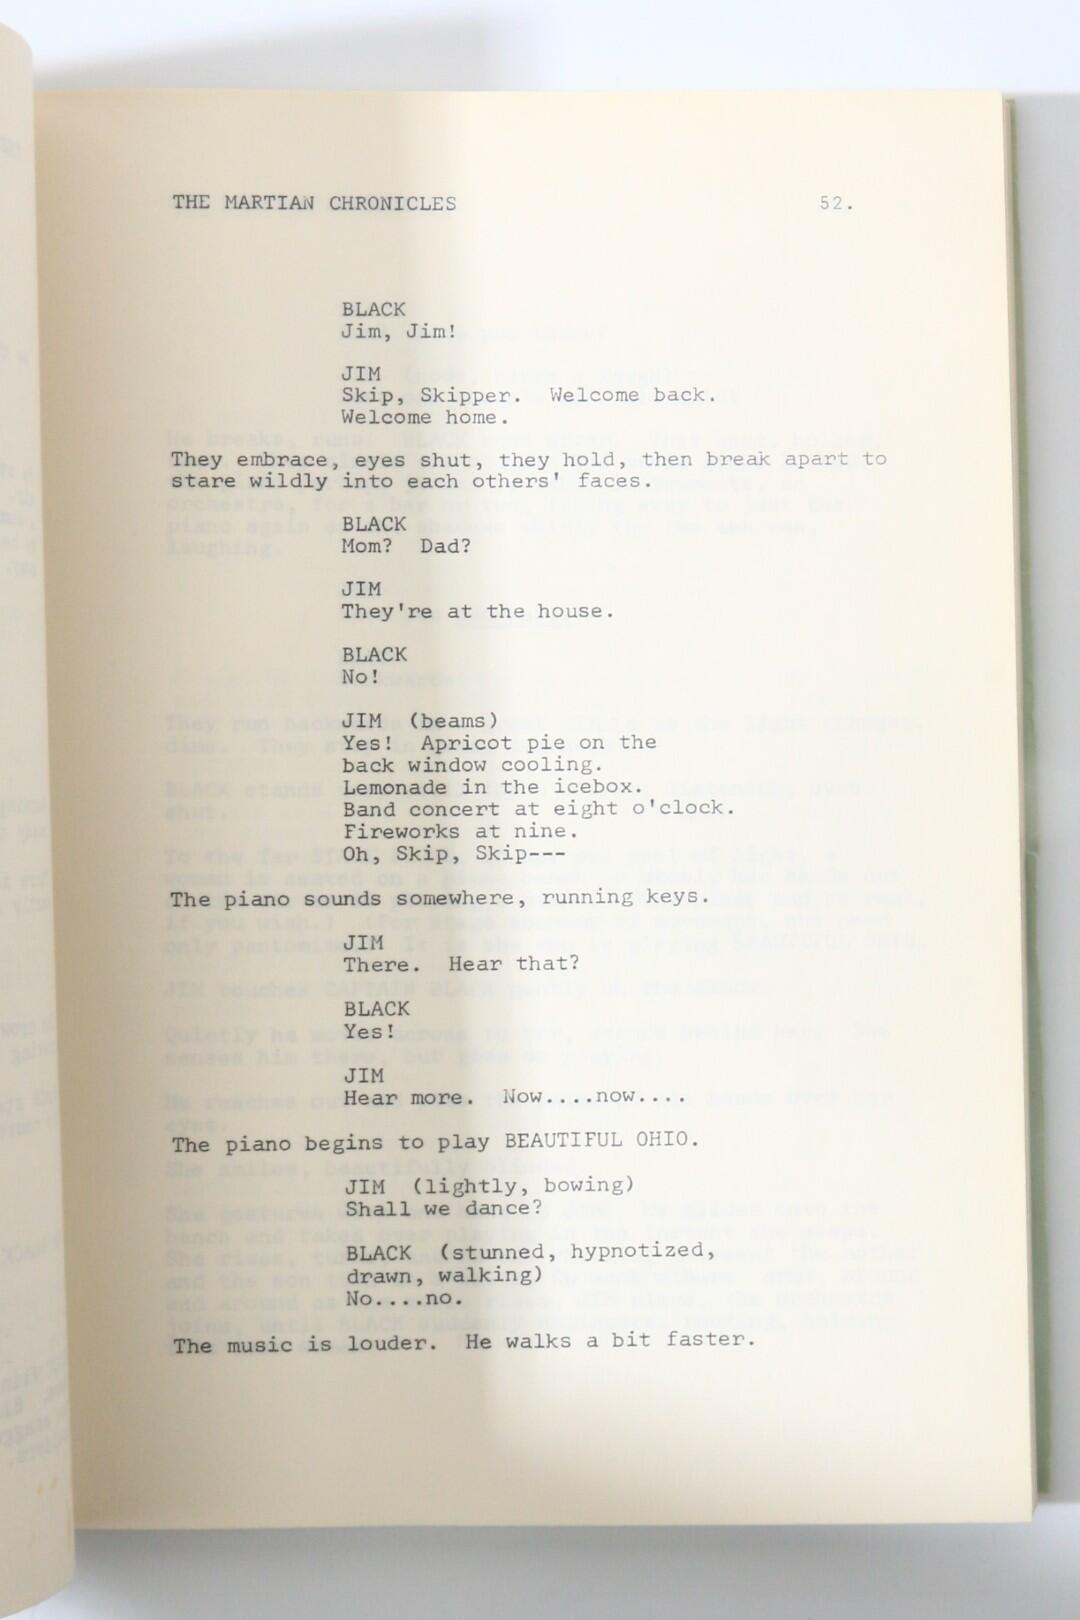 Ray Bradbury - The Martian Chronicles - Original Early Script for the 1976 Play - No Publisher, nd [c1973], Manuscript. Signed